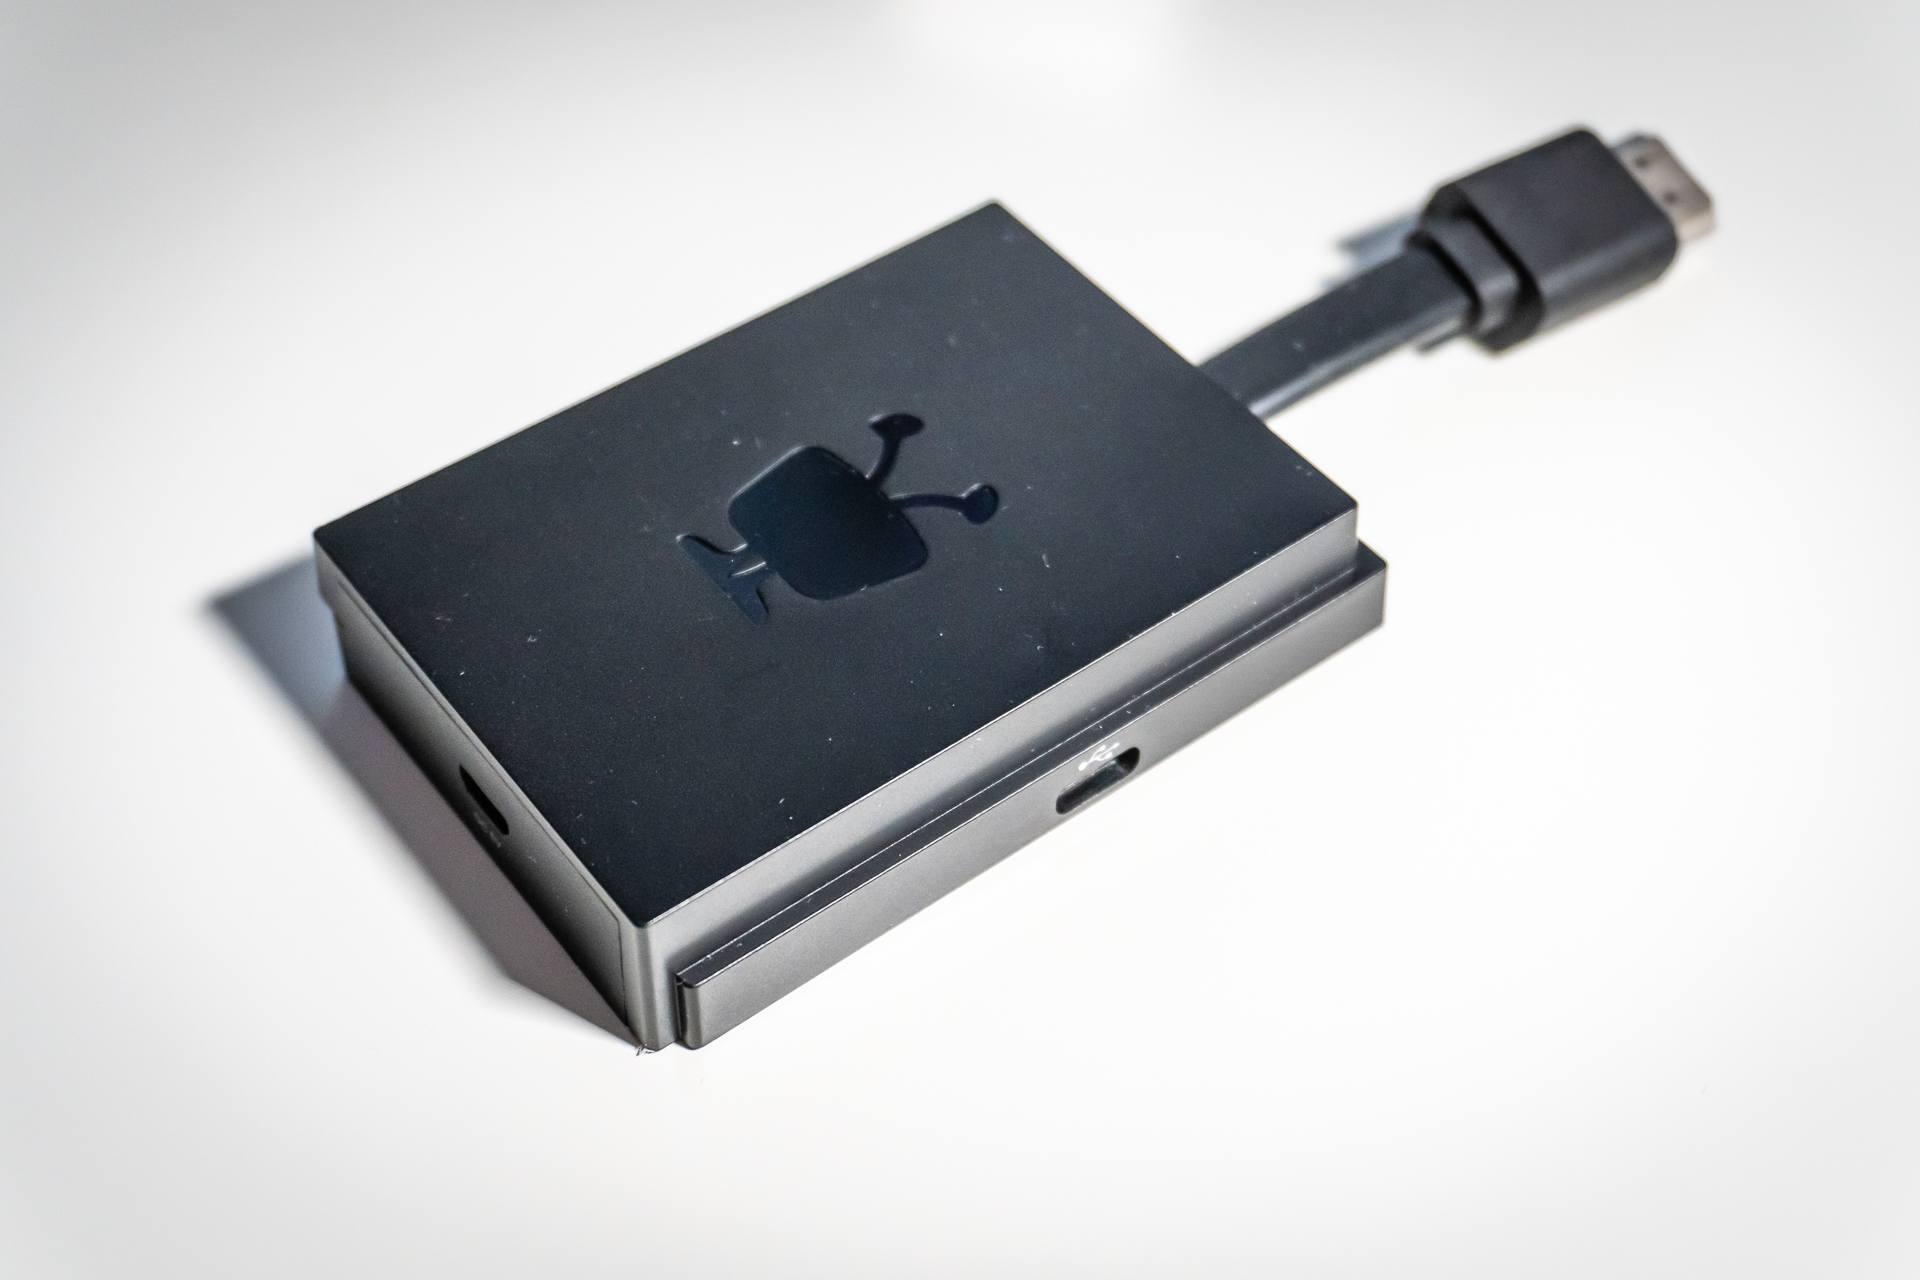 TiVo Stream 4K Review: A Budget-Friendly HDMI Dongle Packs a Limited, but Promising App